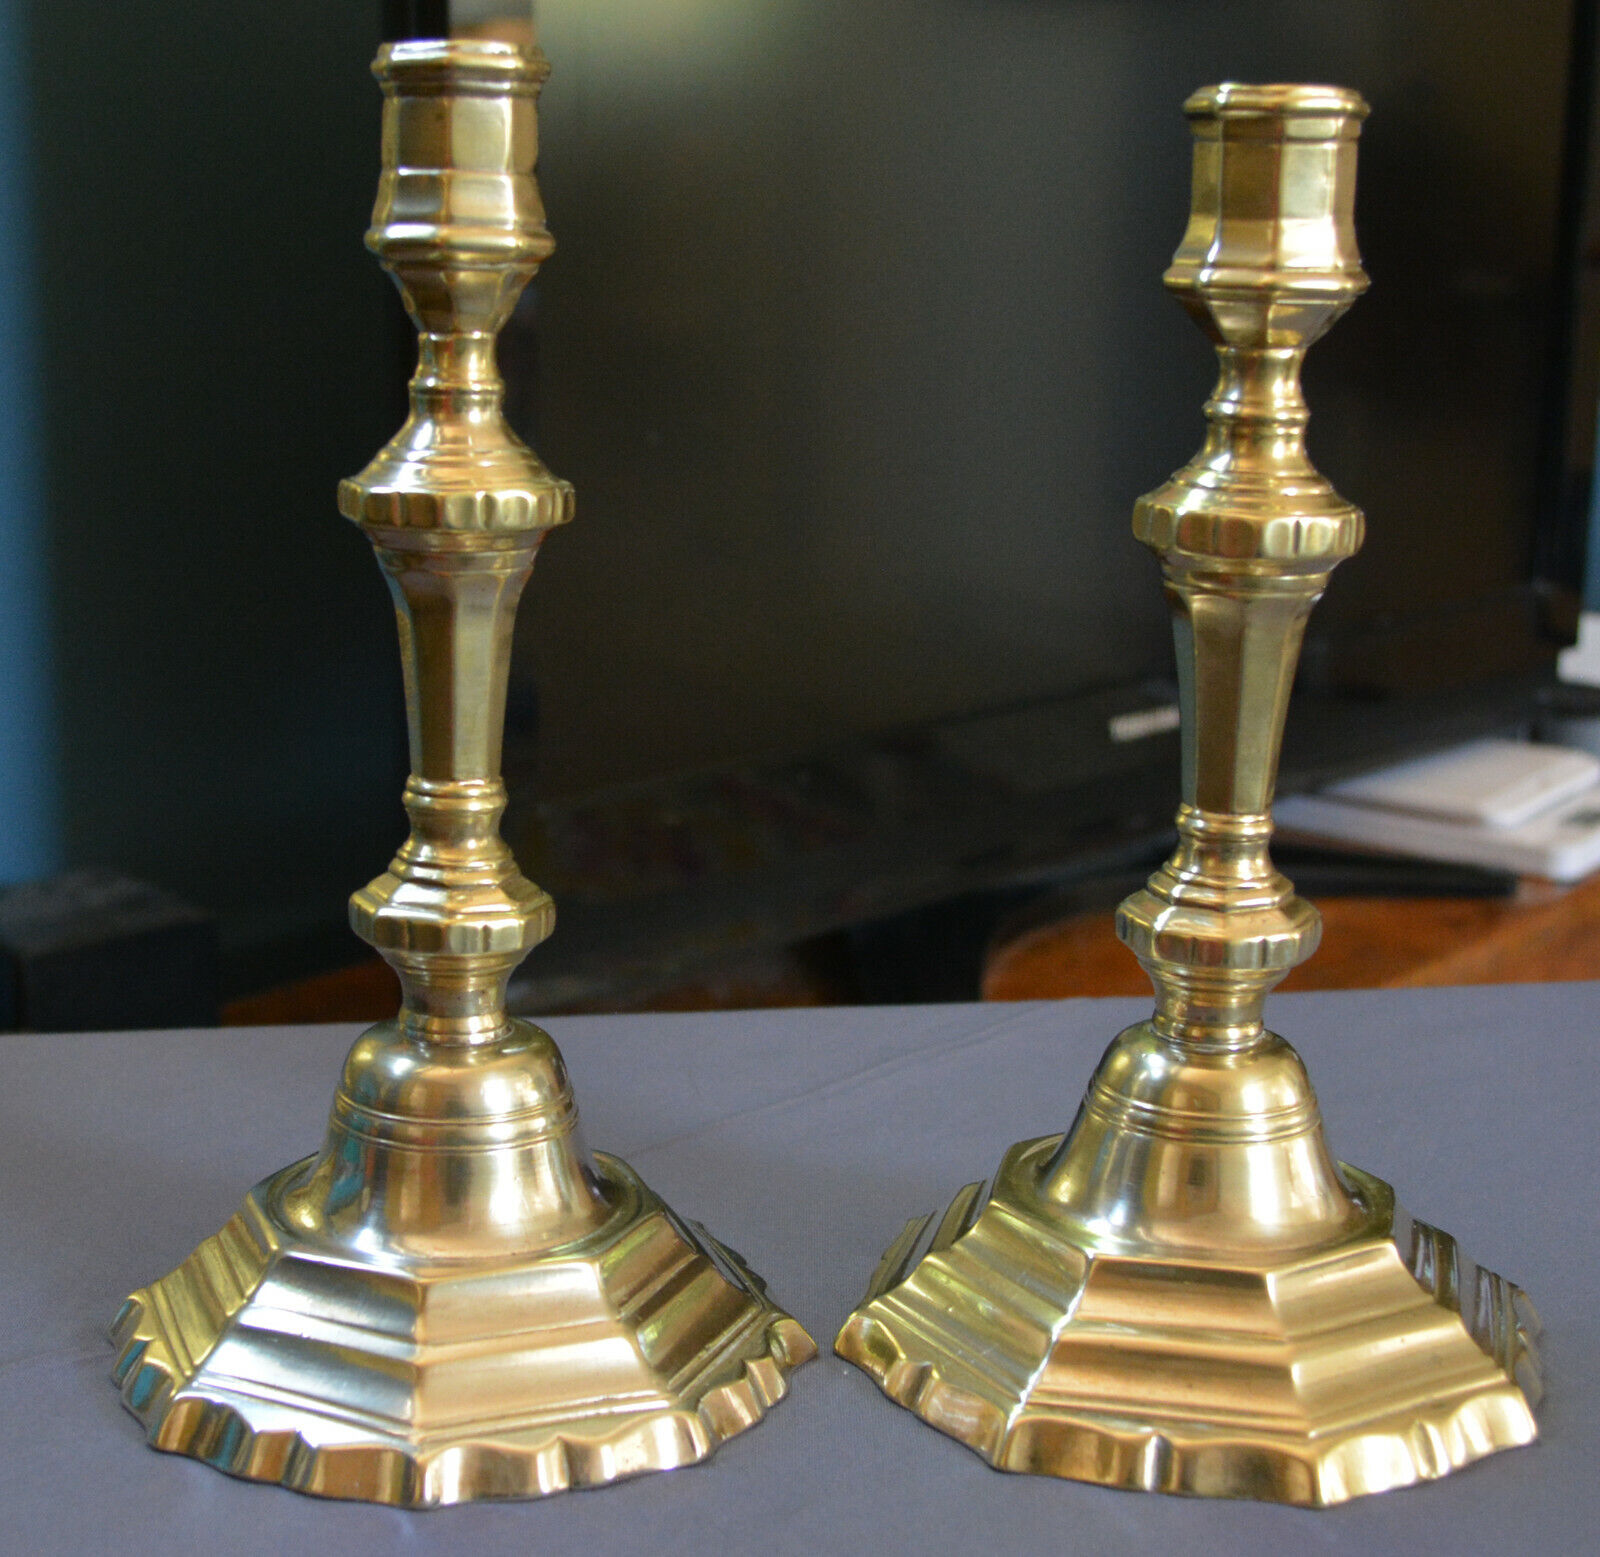 FINE PAIR EARLY 18TH C FRENCH SILVERED BRASS SCALLOPED BASE CANDLESTICK C 1700  